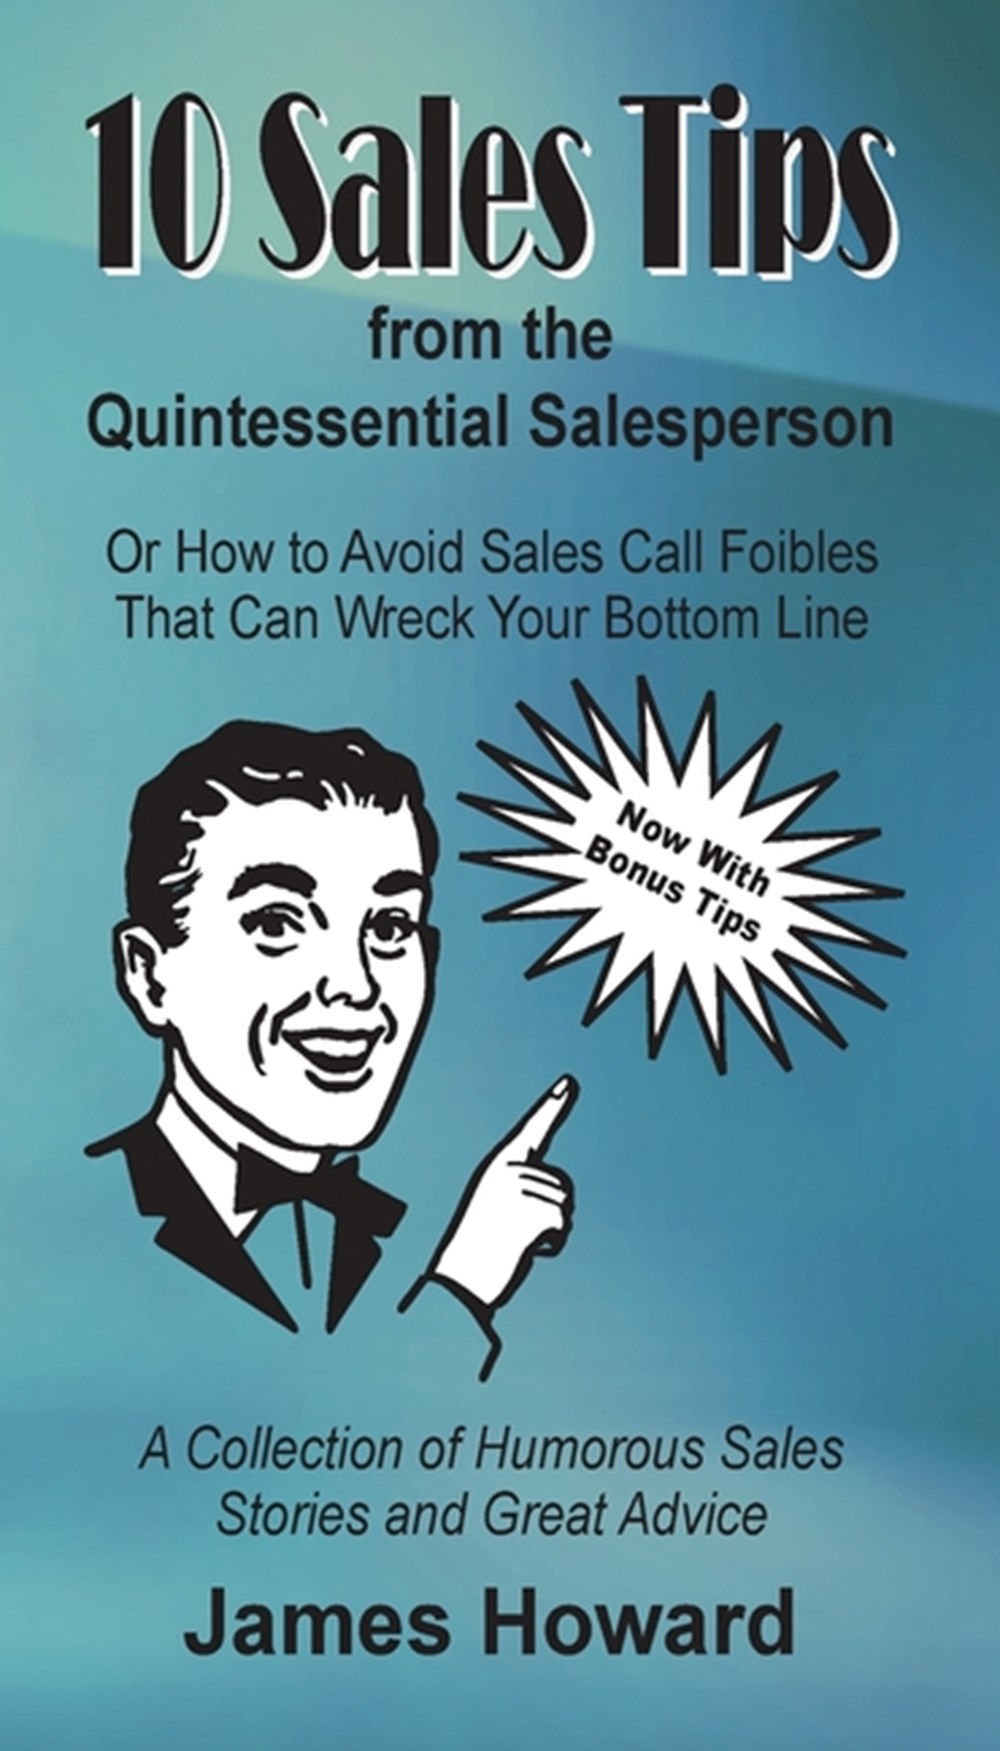 10 Sales Tips From The Quintessential Salesperson How to Avoid Sales Call Foibles That Can Wreck You